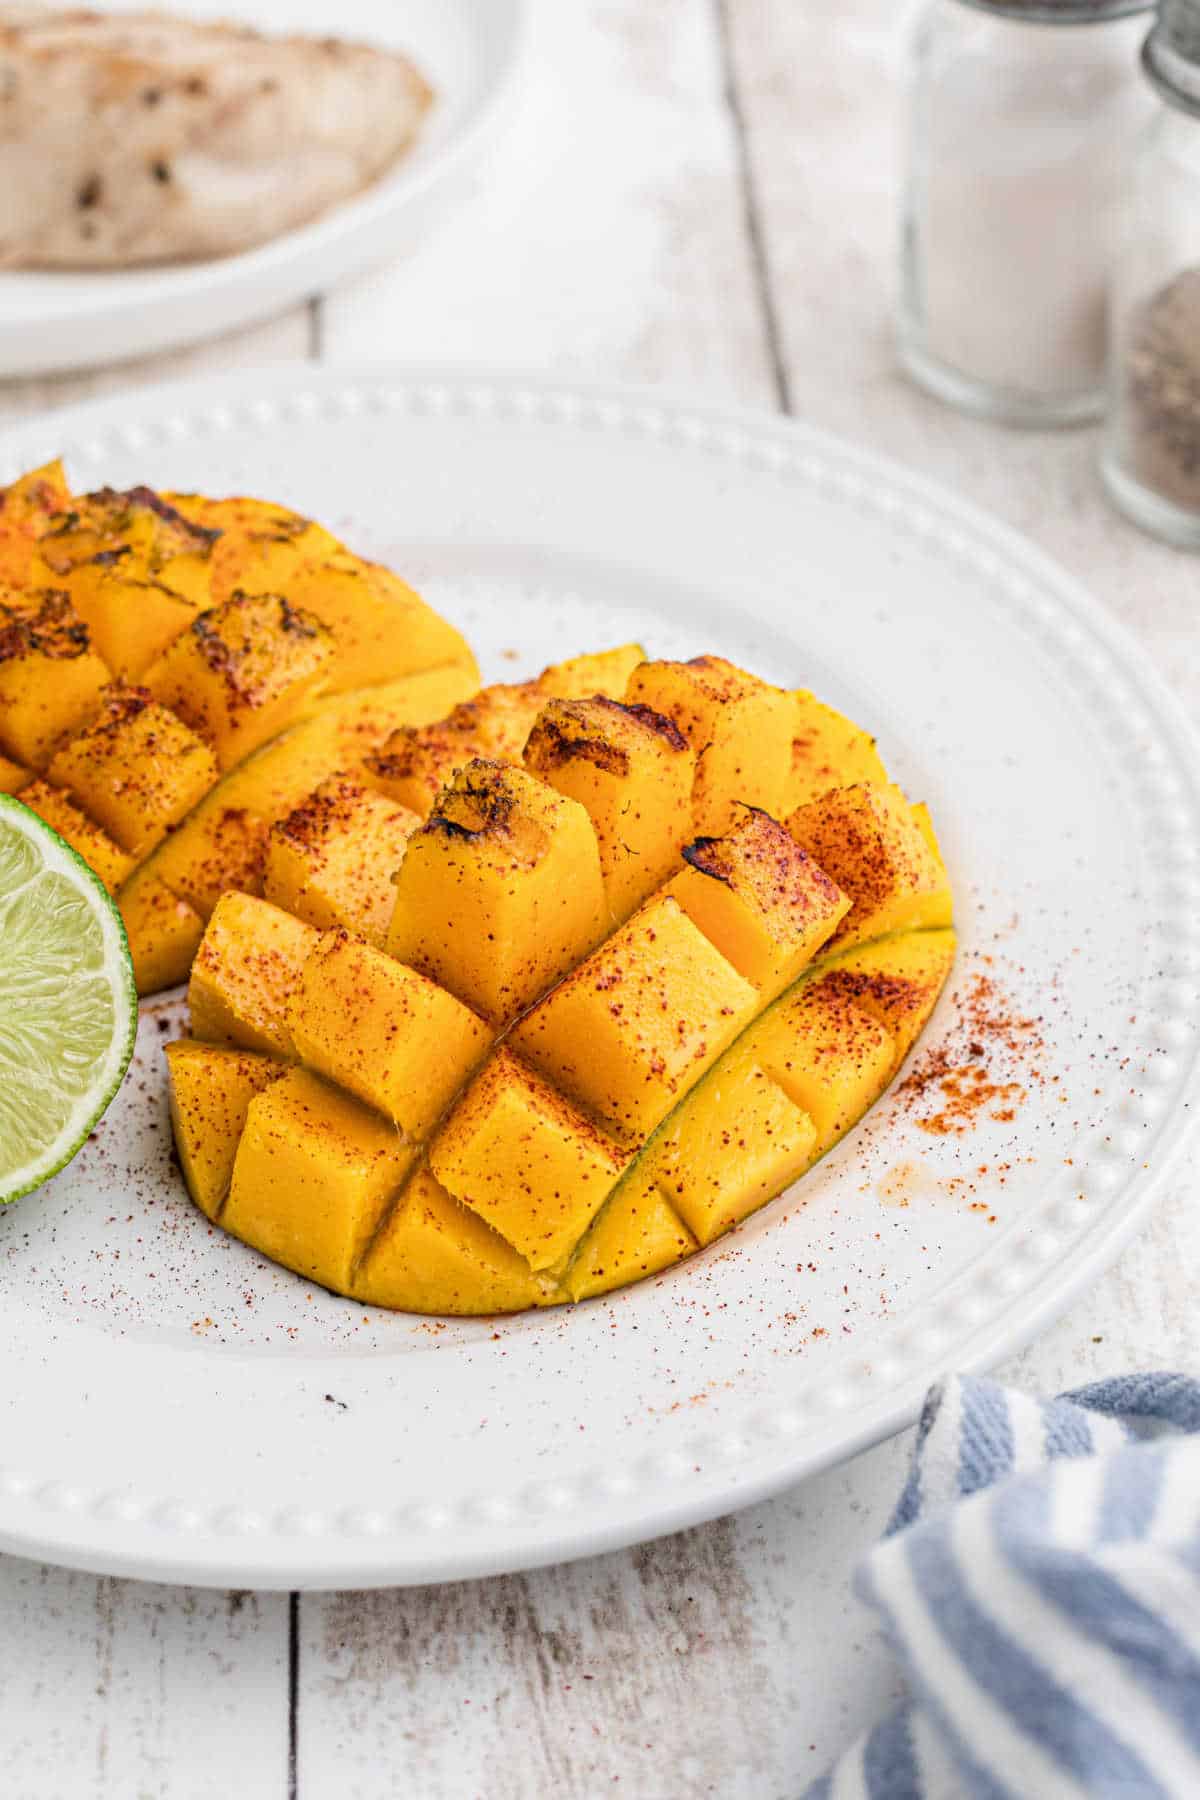 Grilled mango on a plate with seasoning.